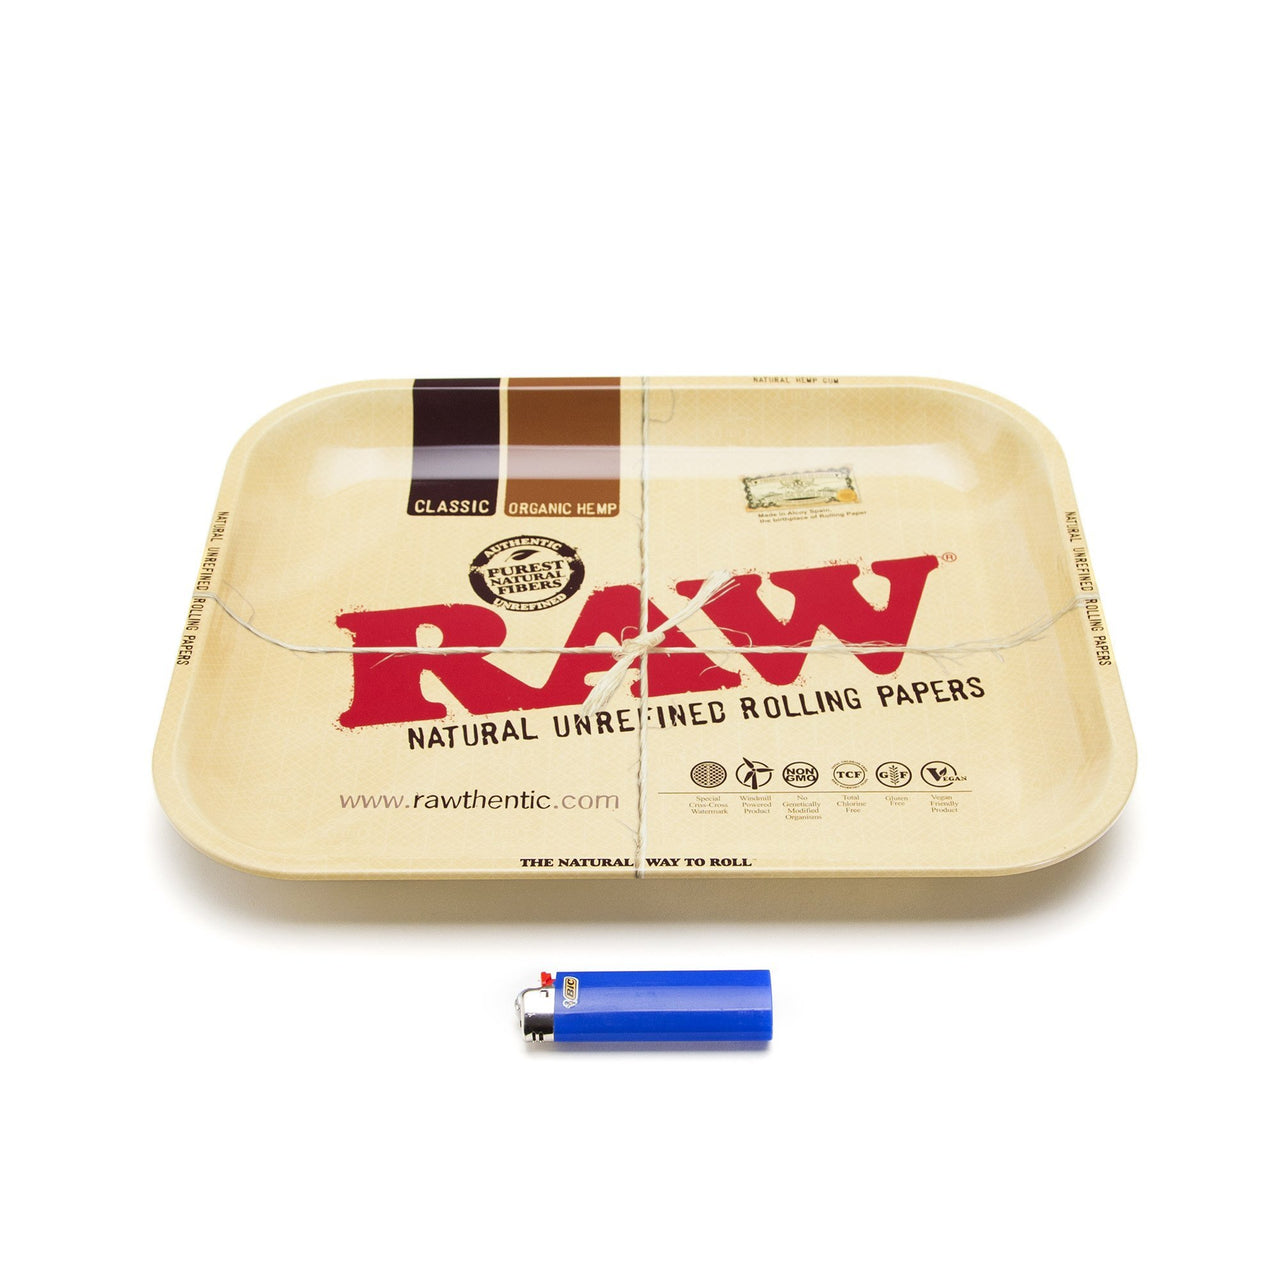 Rolling Tray - High Way 420 - Bad Annies